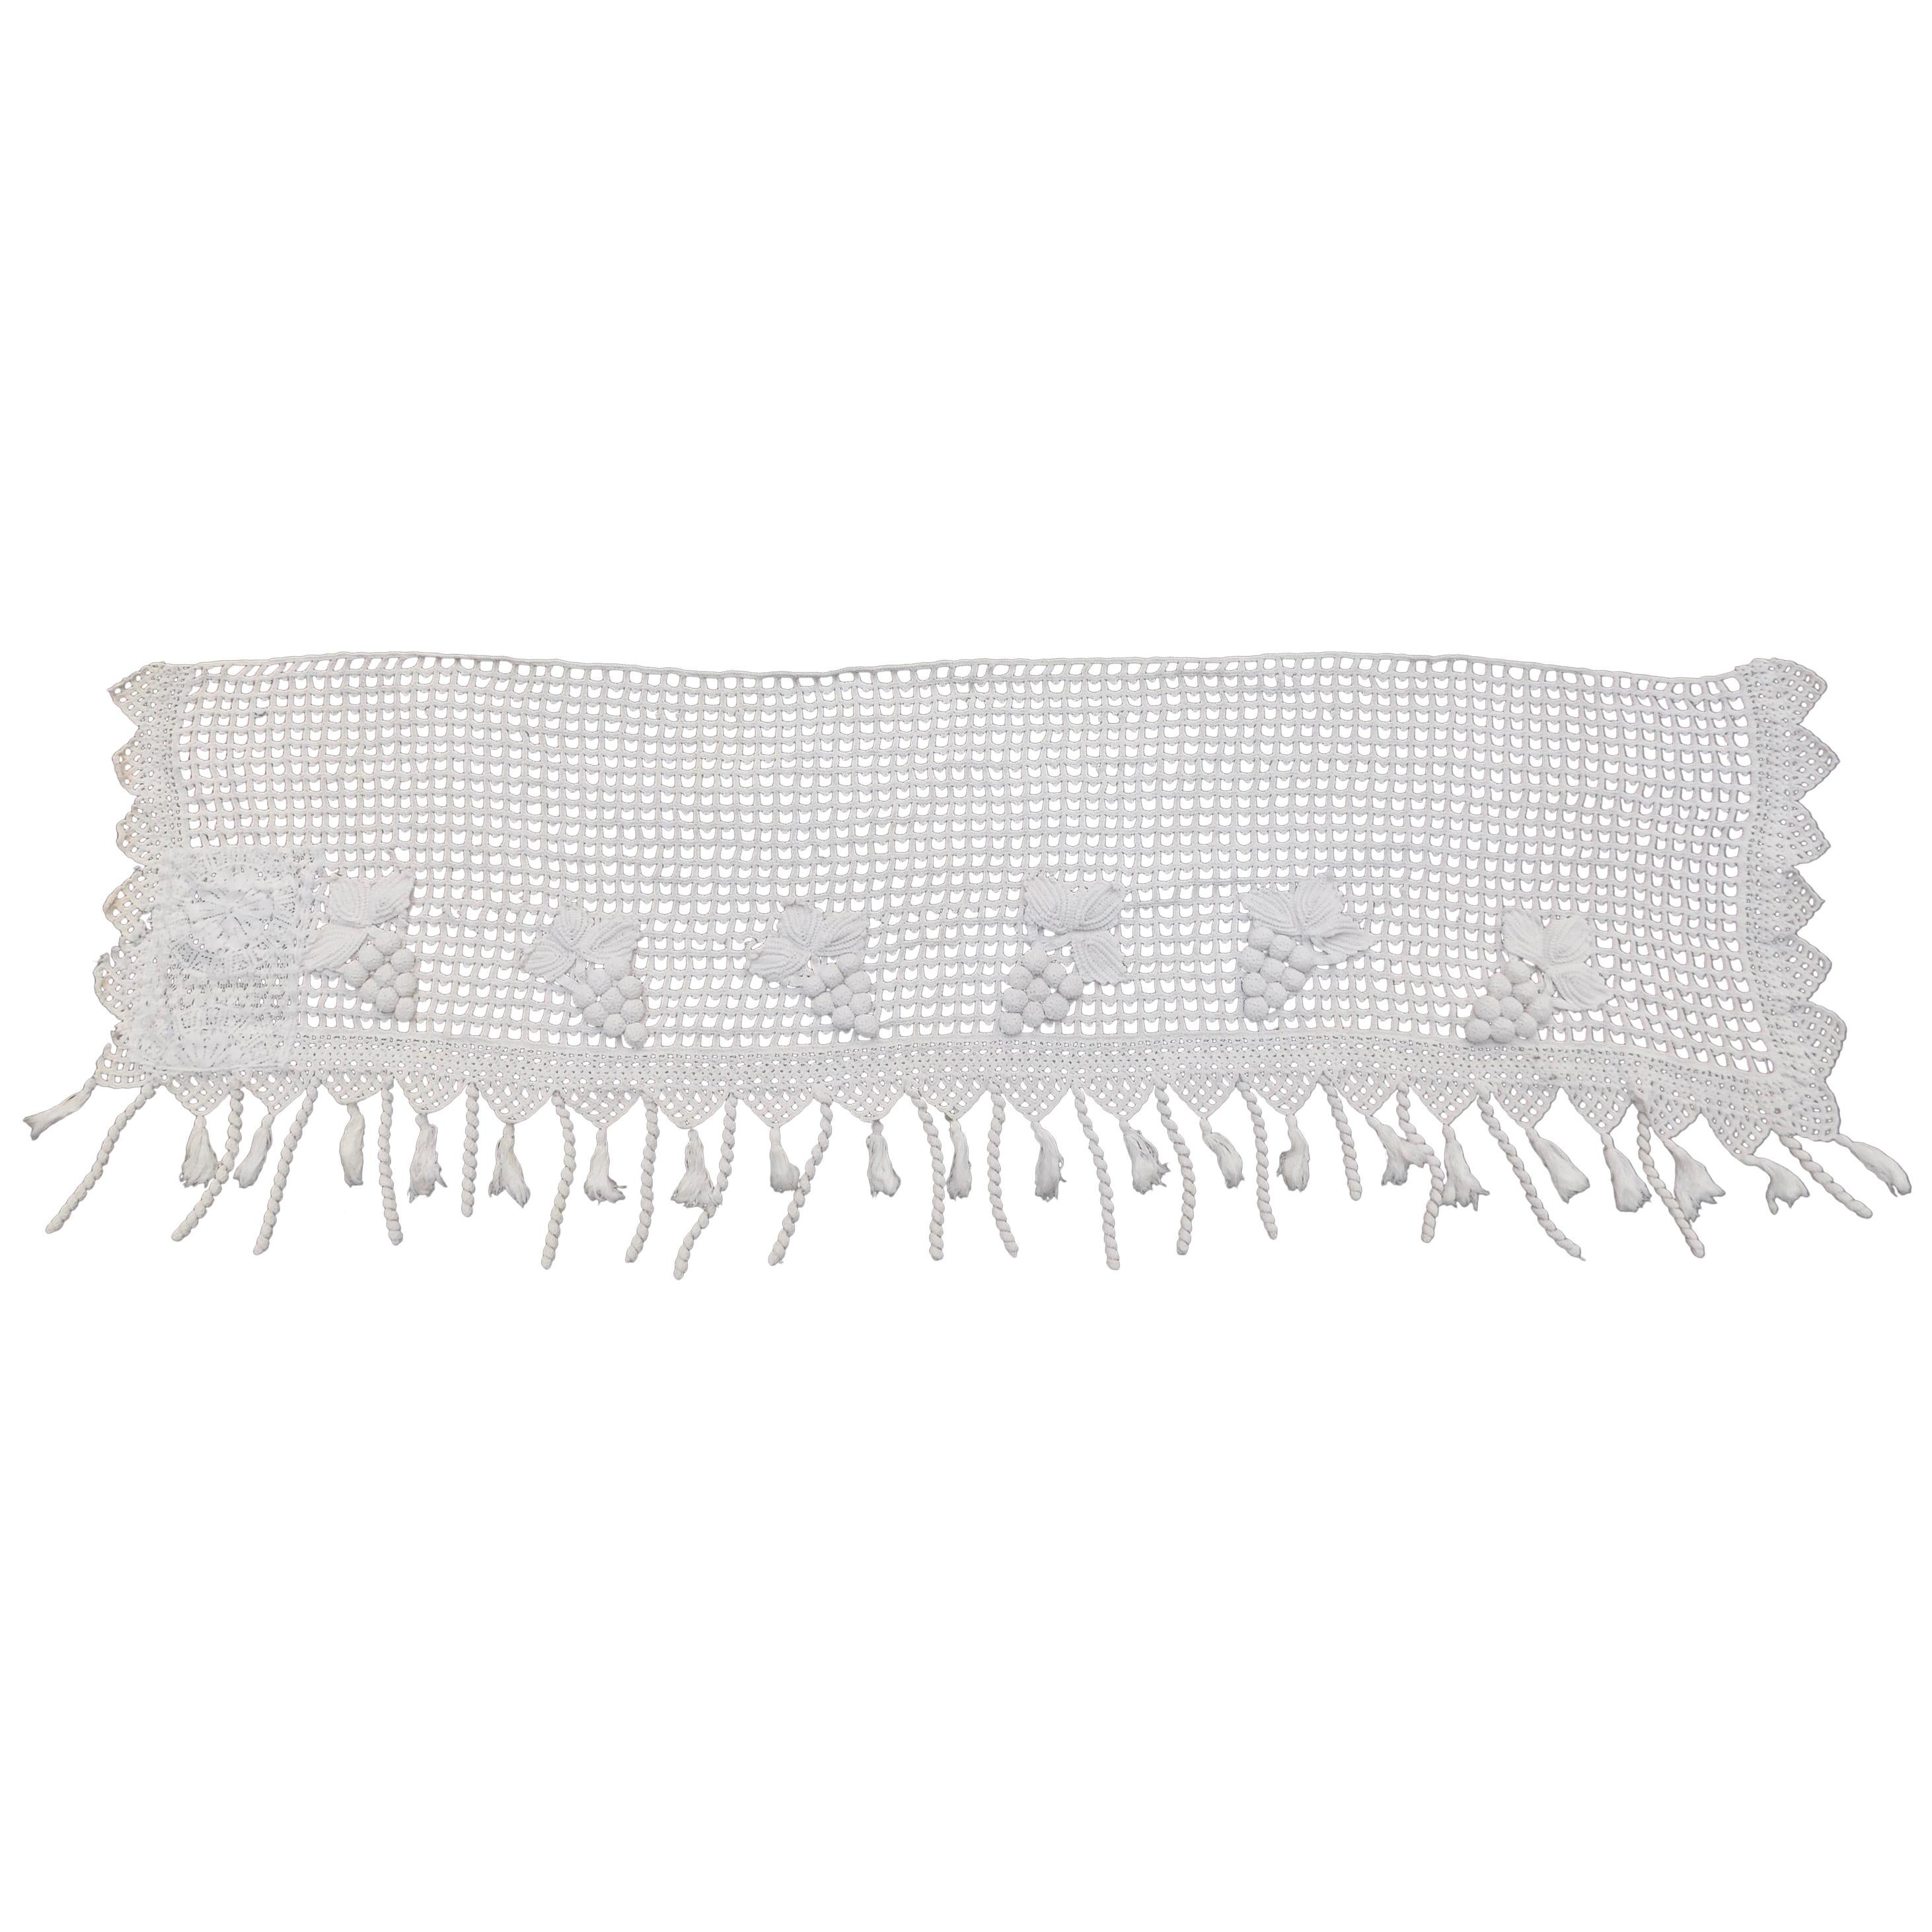 Vintage Spanish Crocheted Cotton Valance with Grapes For Sale